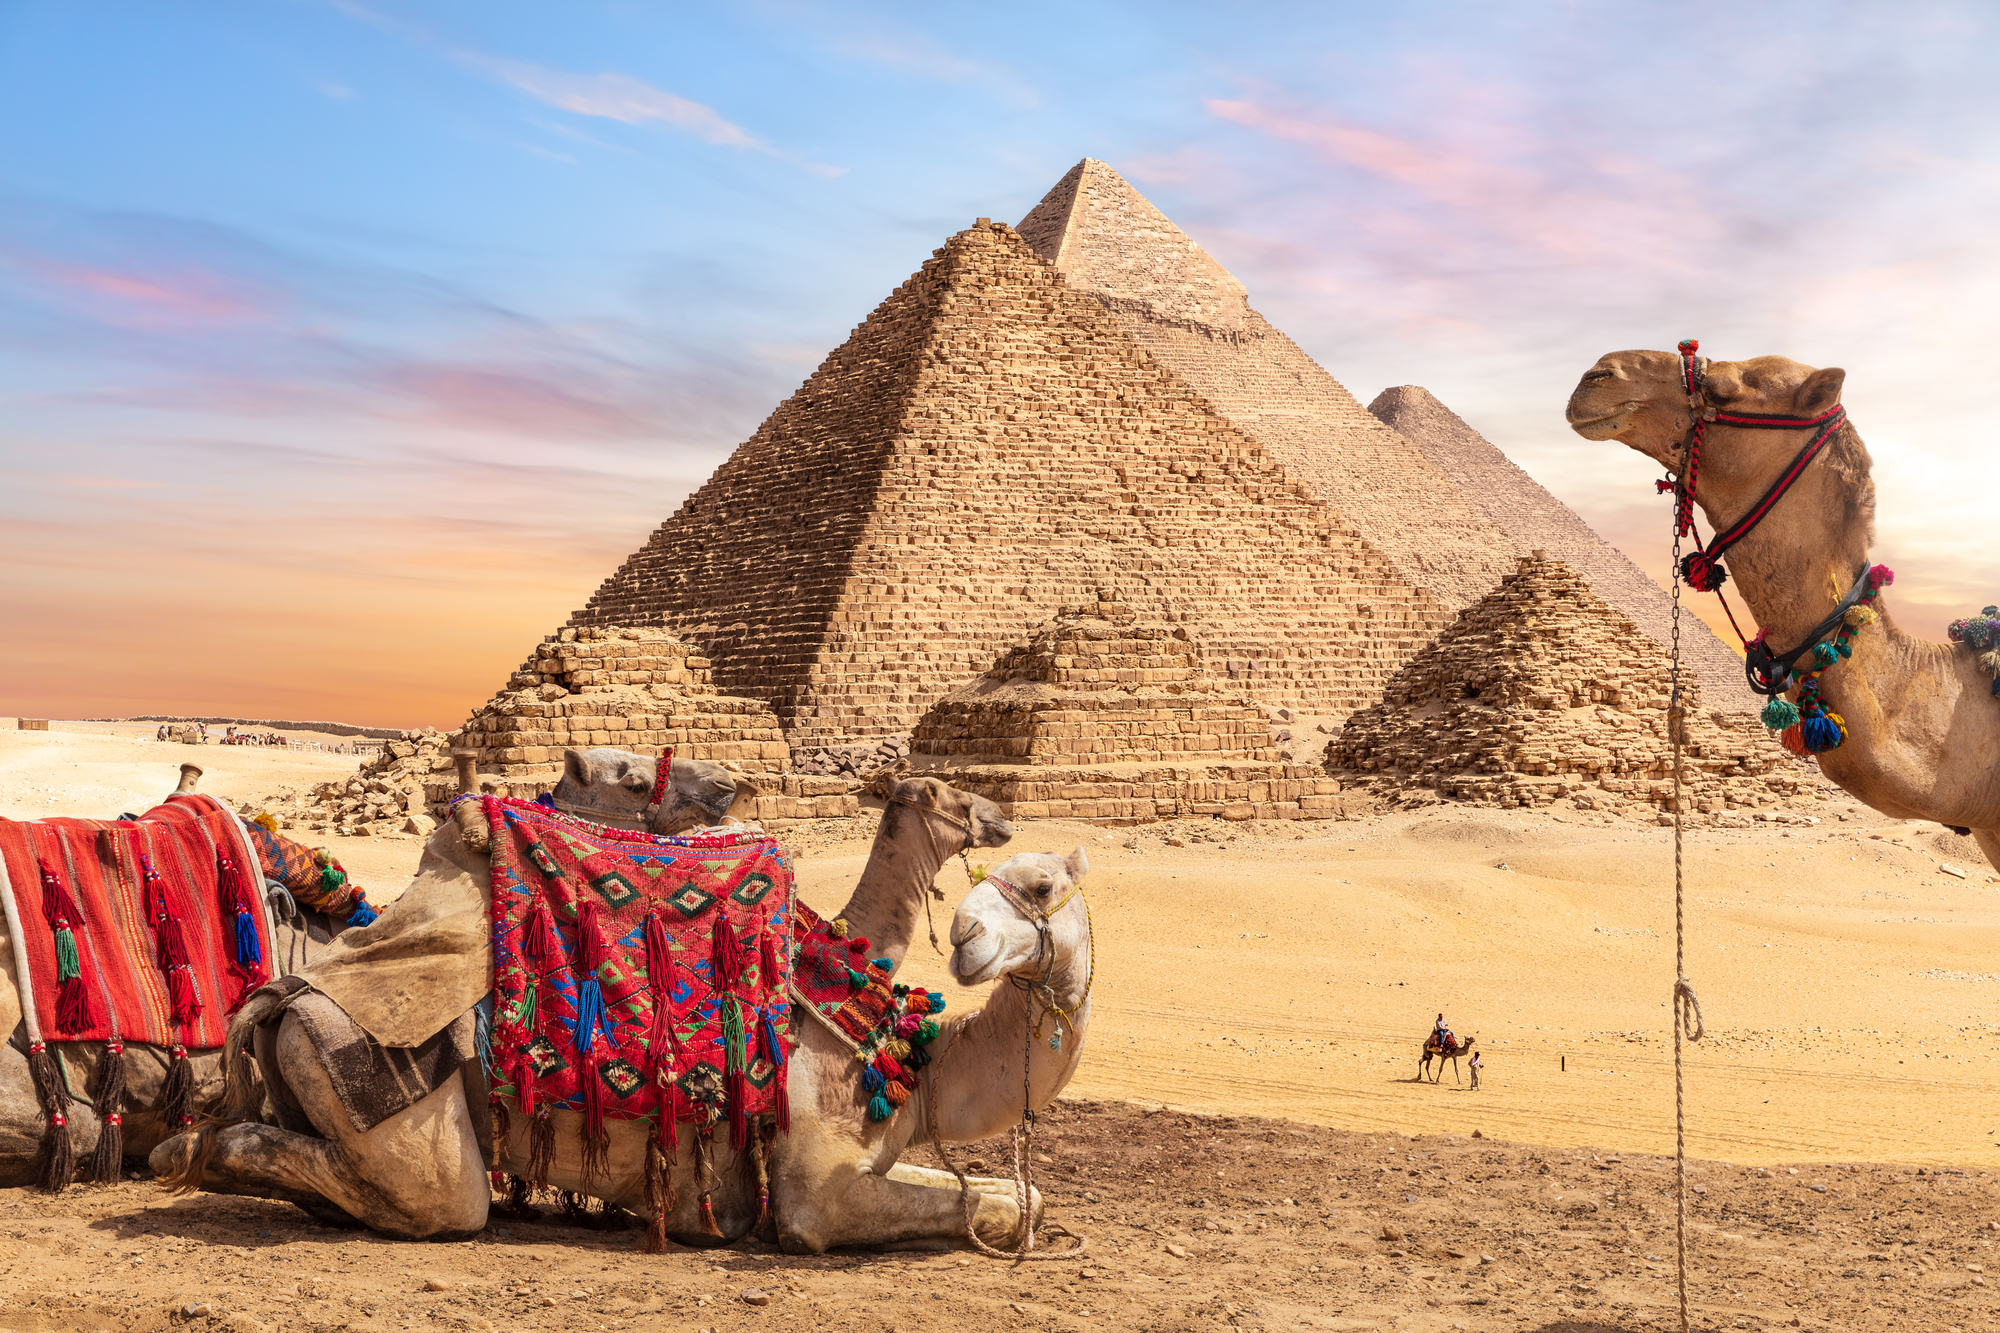 Camels near the Pyramids of Giza, Egypt.